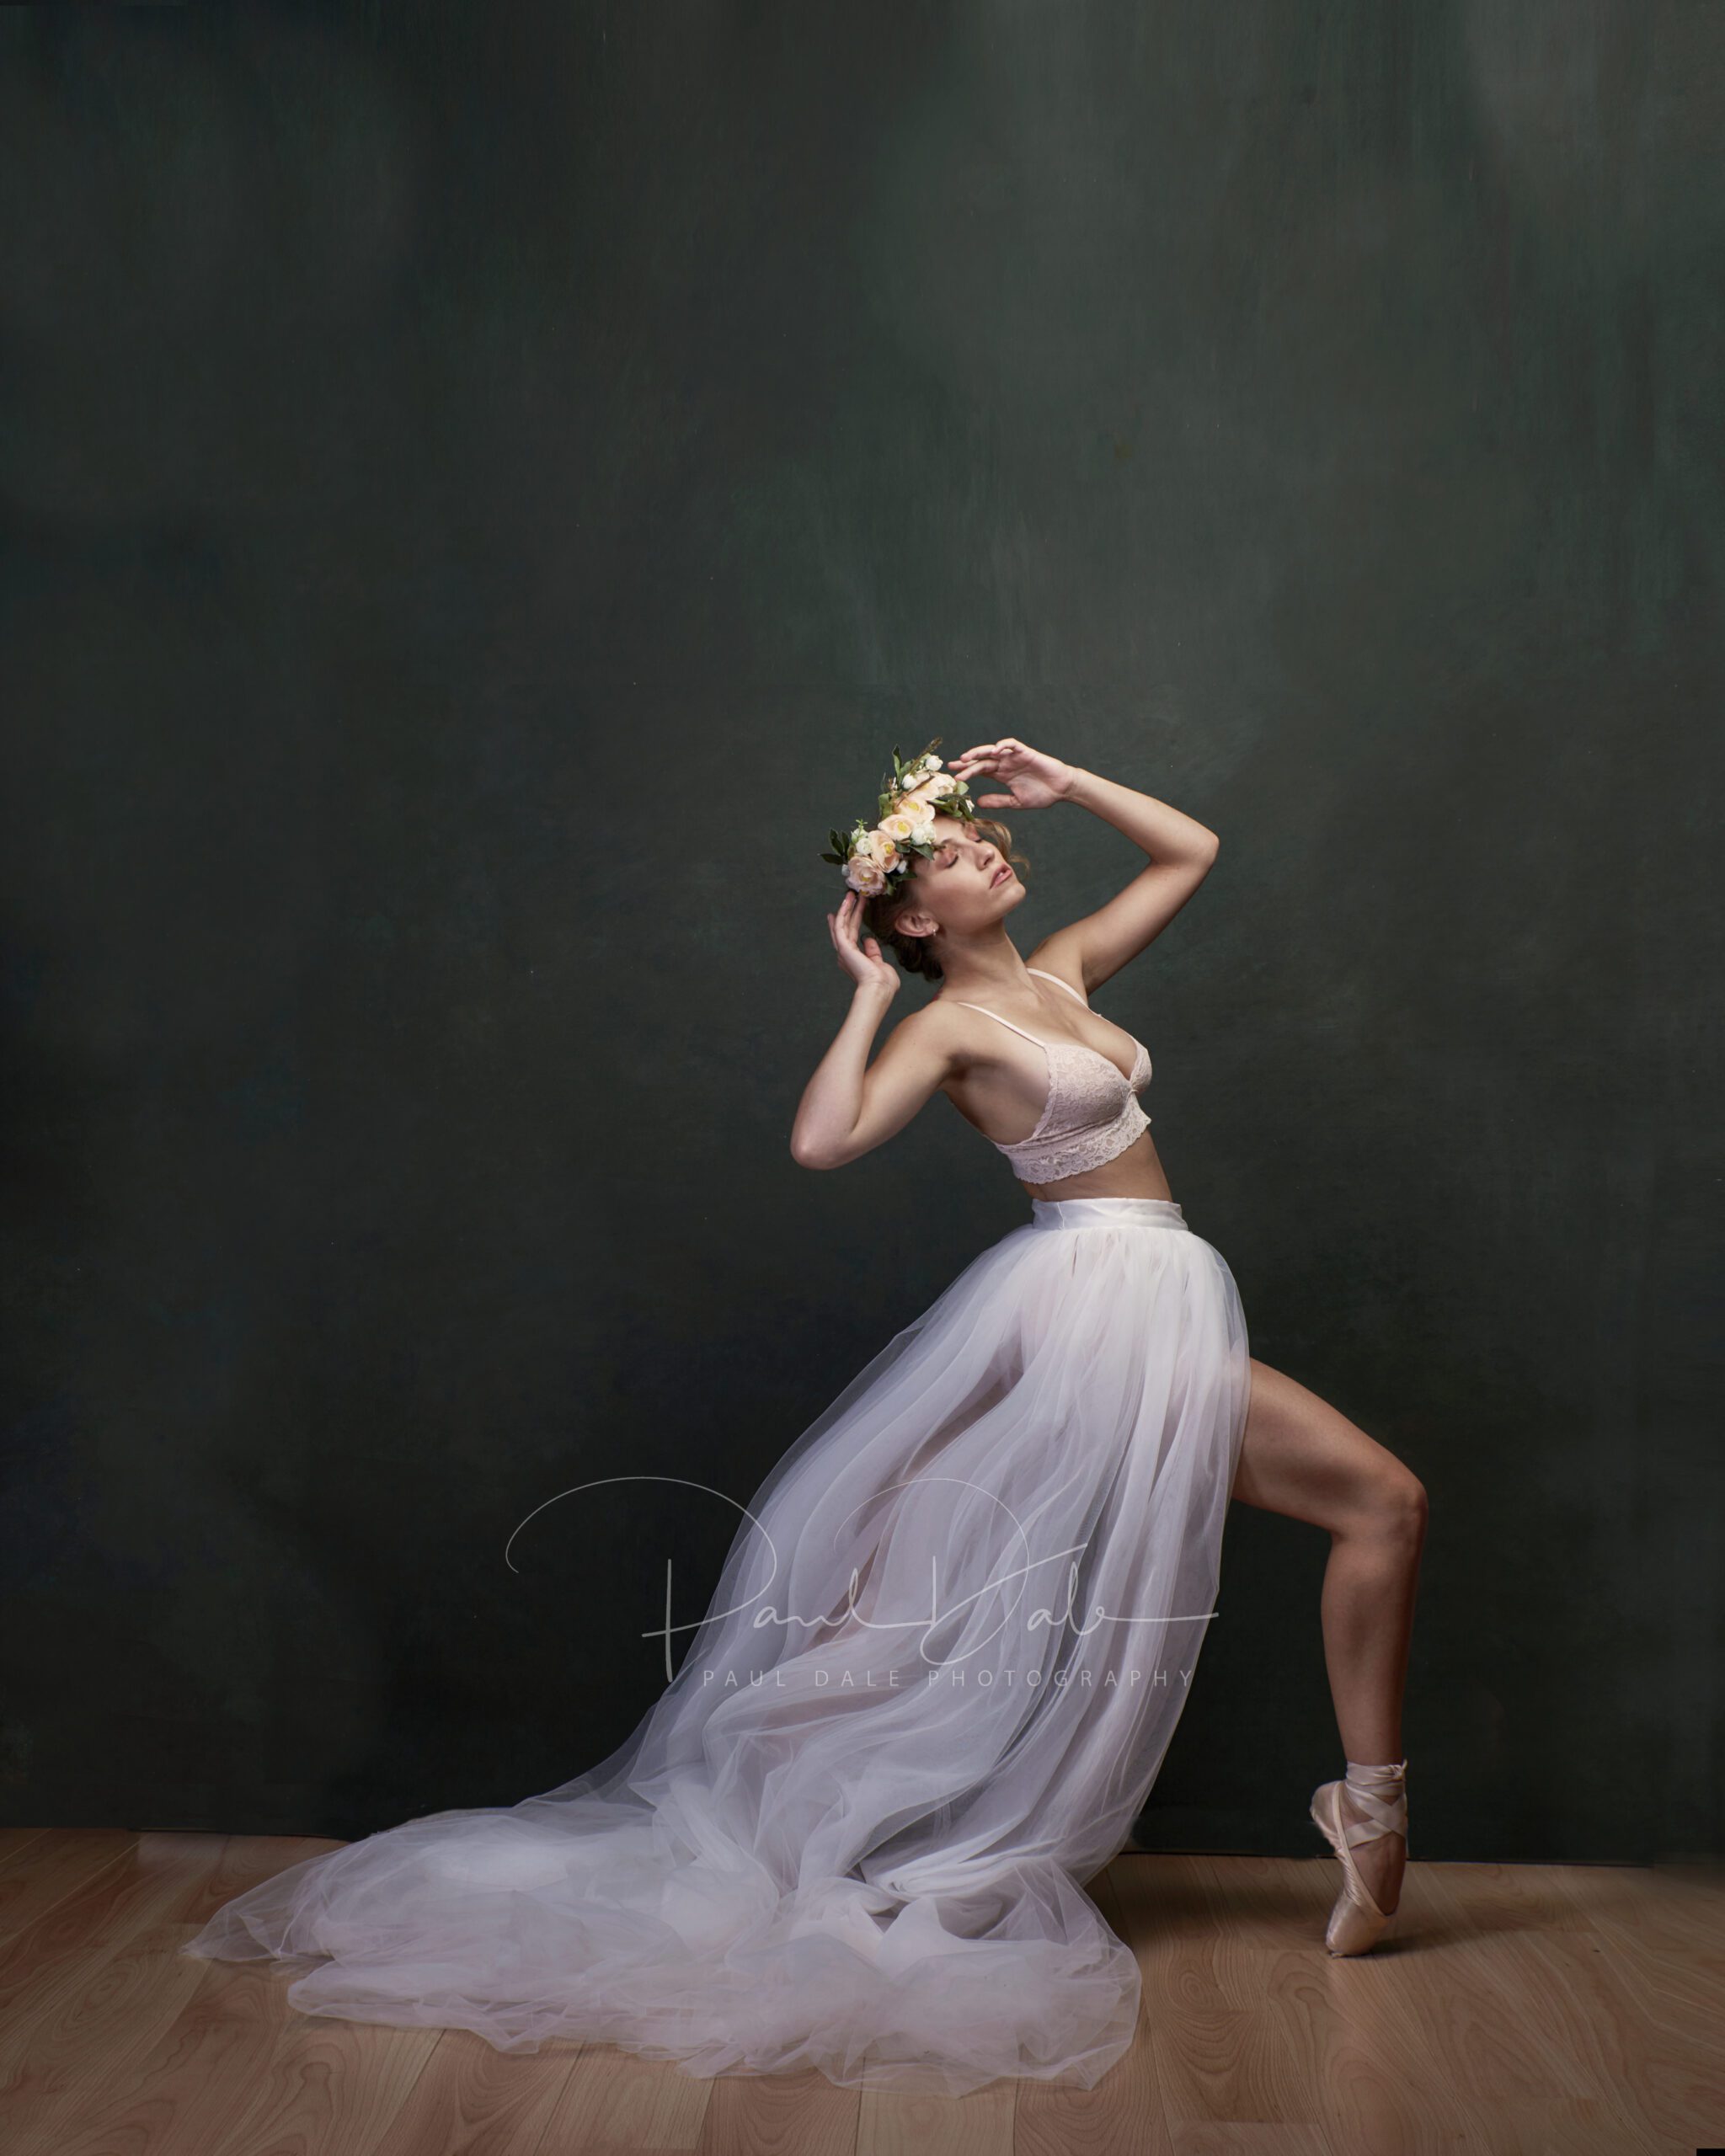 Ballet dancer in pointe shoes with a long flowing white skirt